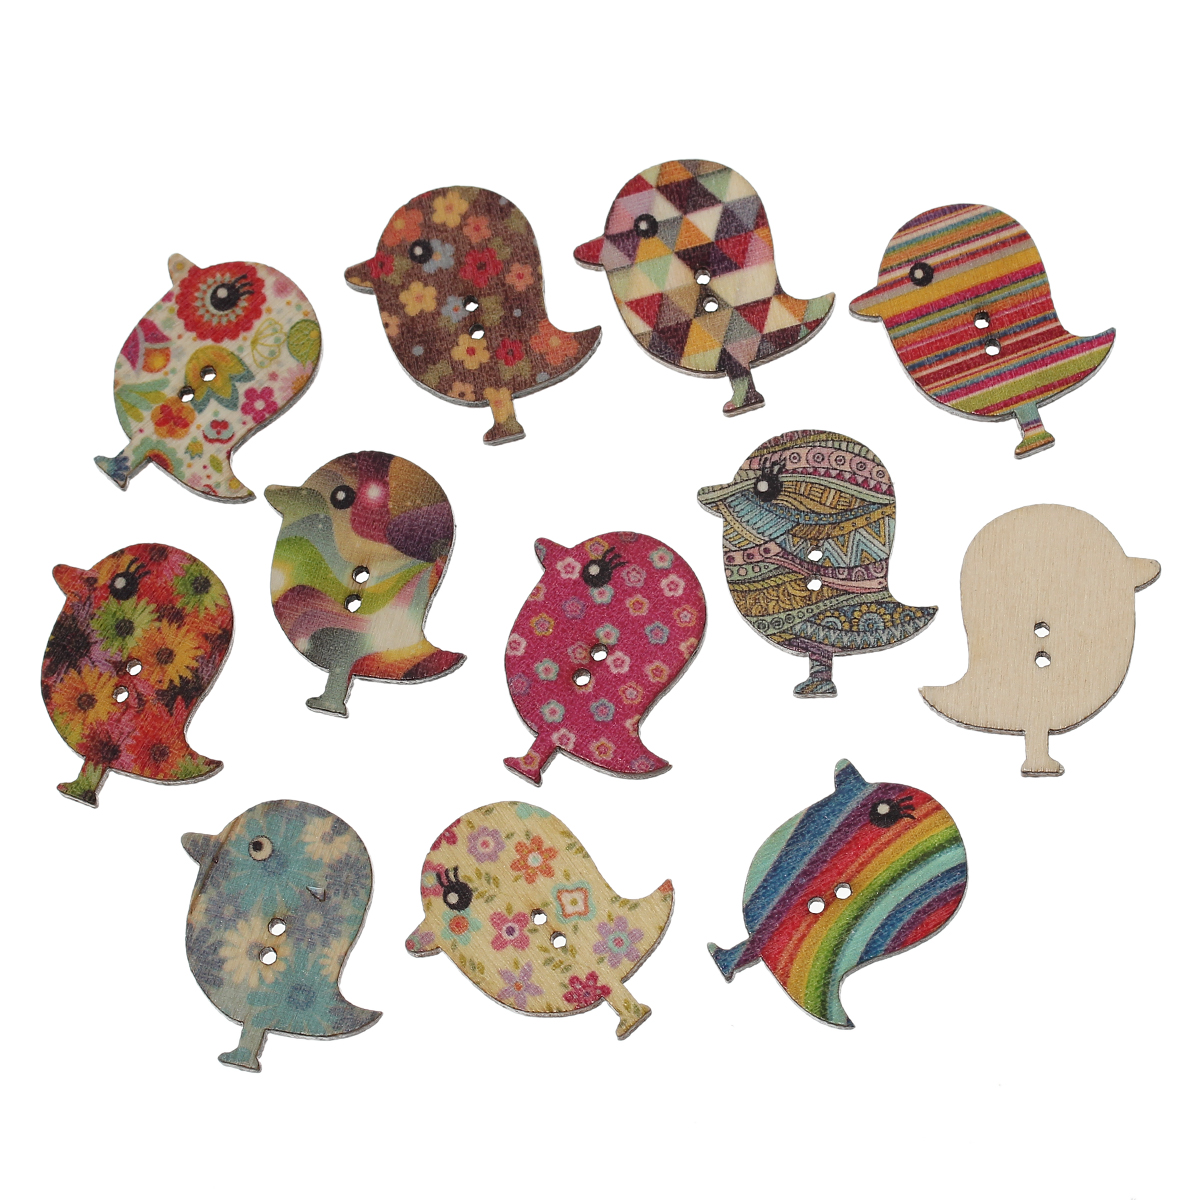 Picture of Wood Sewing Buttons Scrapbooking 2 Holes Bird Animal At Random 30mm(1 1/8") x 28mm(1 1/8"), 100 PCs